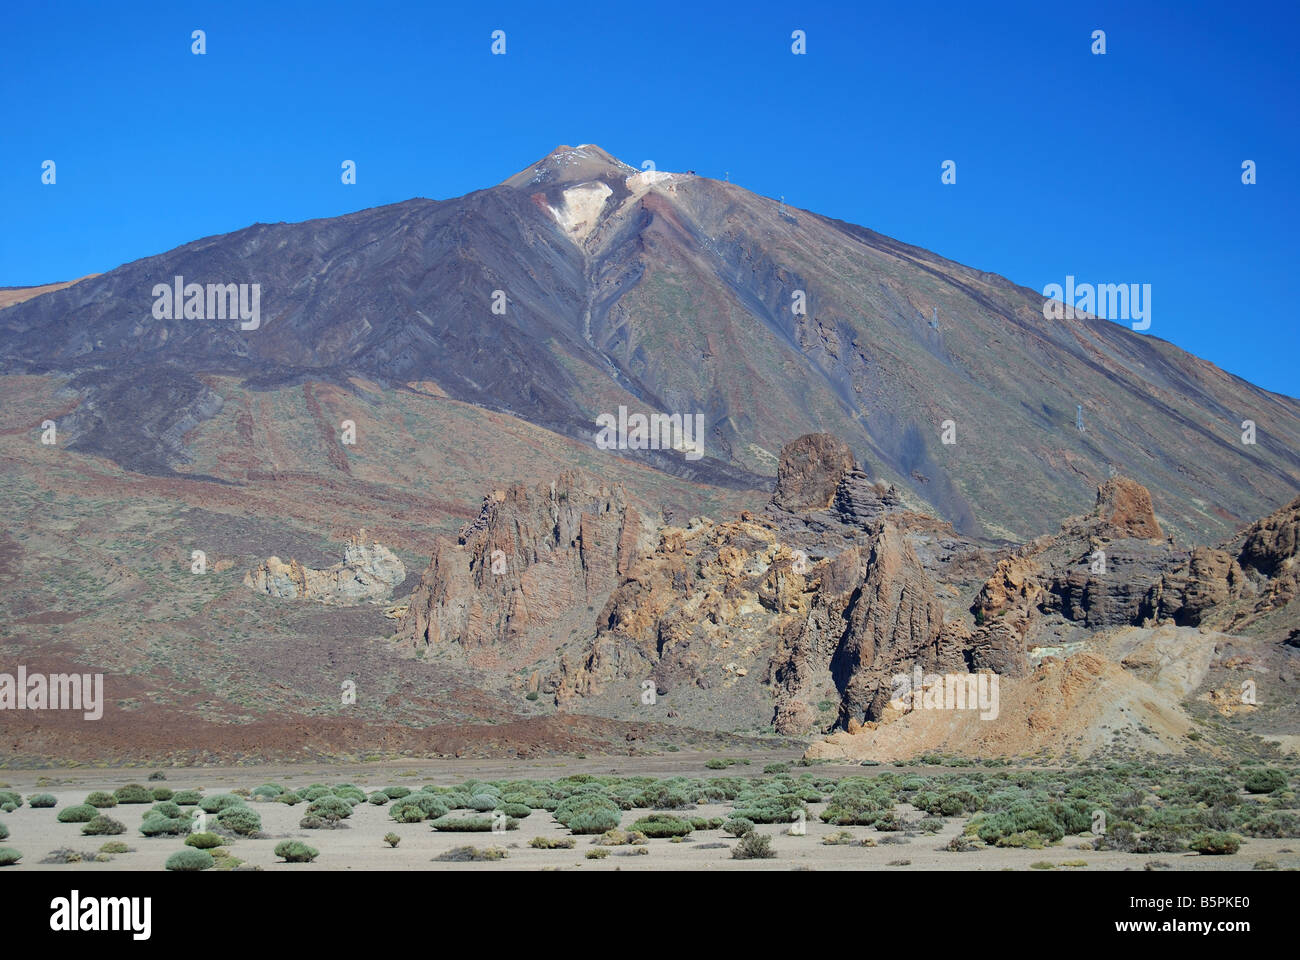 View of Mt.Teide across lava fields from lookout point, Parque Nacional Del Teide, Tenerife, Canary Islands, Spain Stock Photo